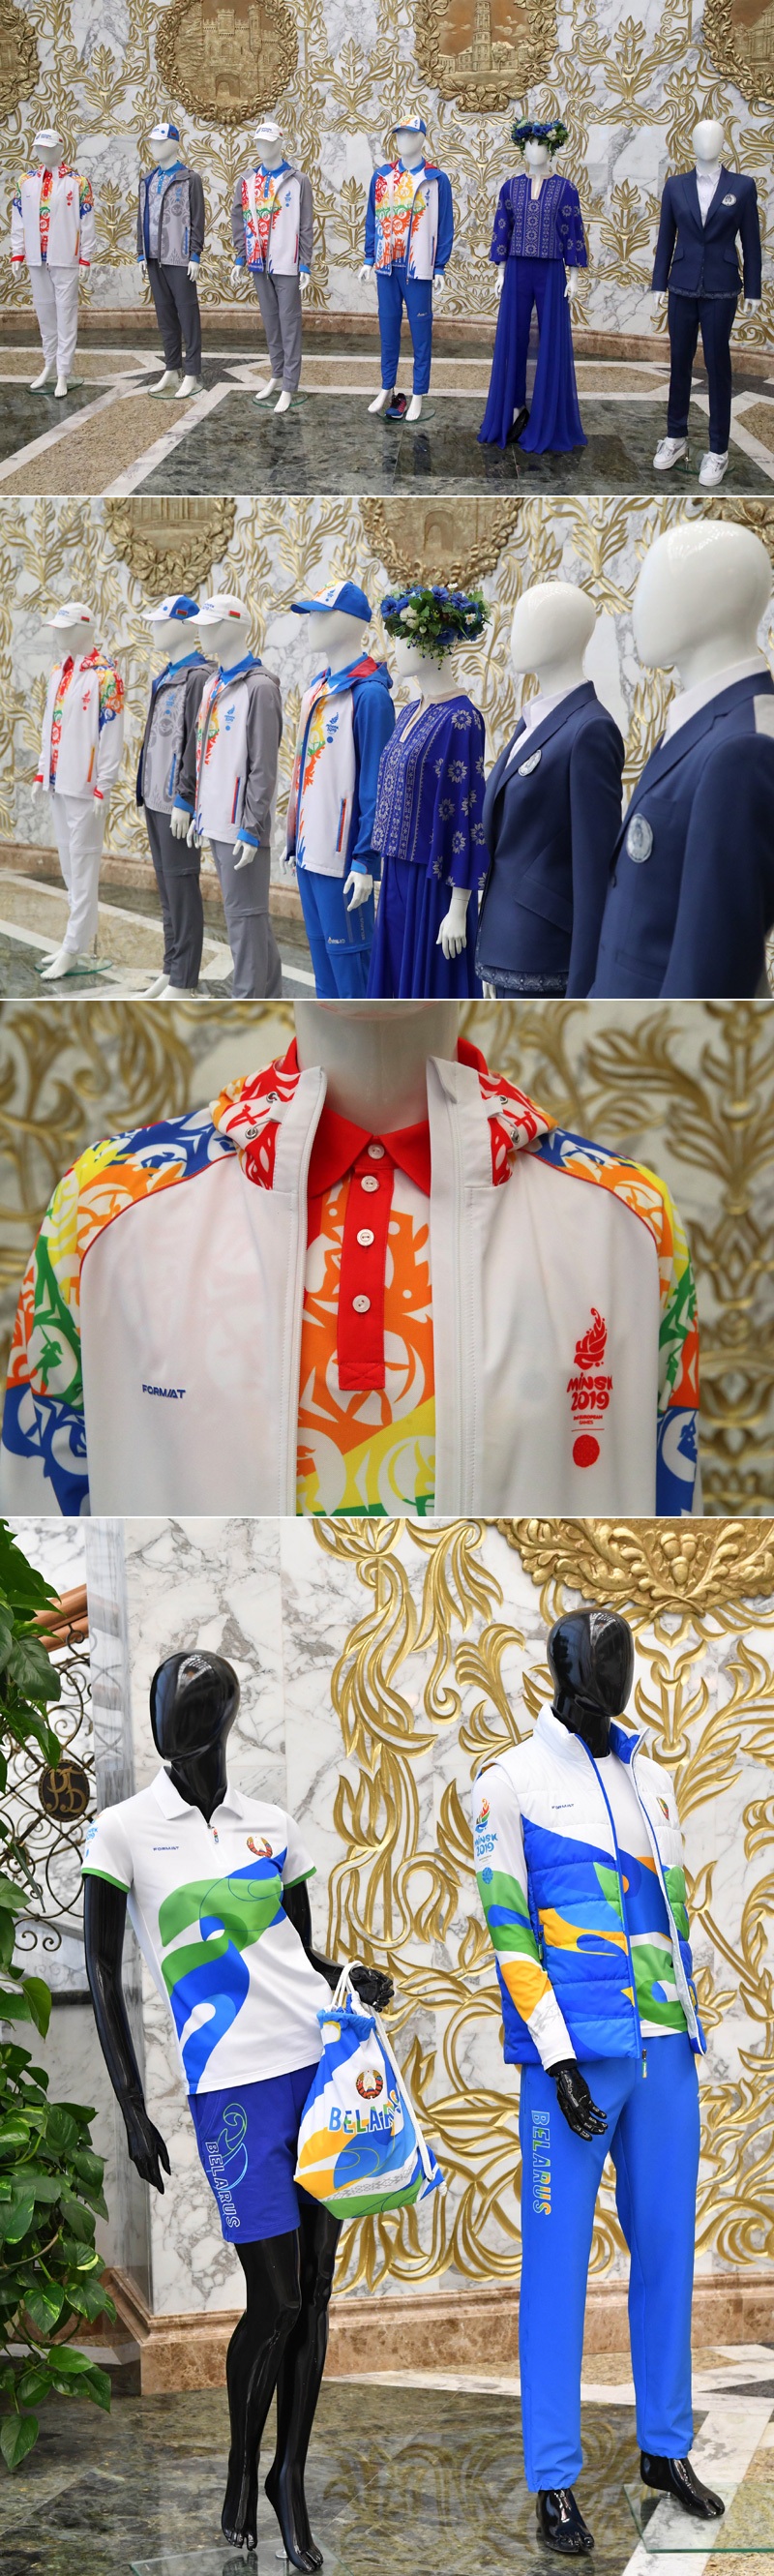 Team Belarus and volunteer outfits for the 2nd European Games MINSK 2019